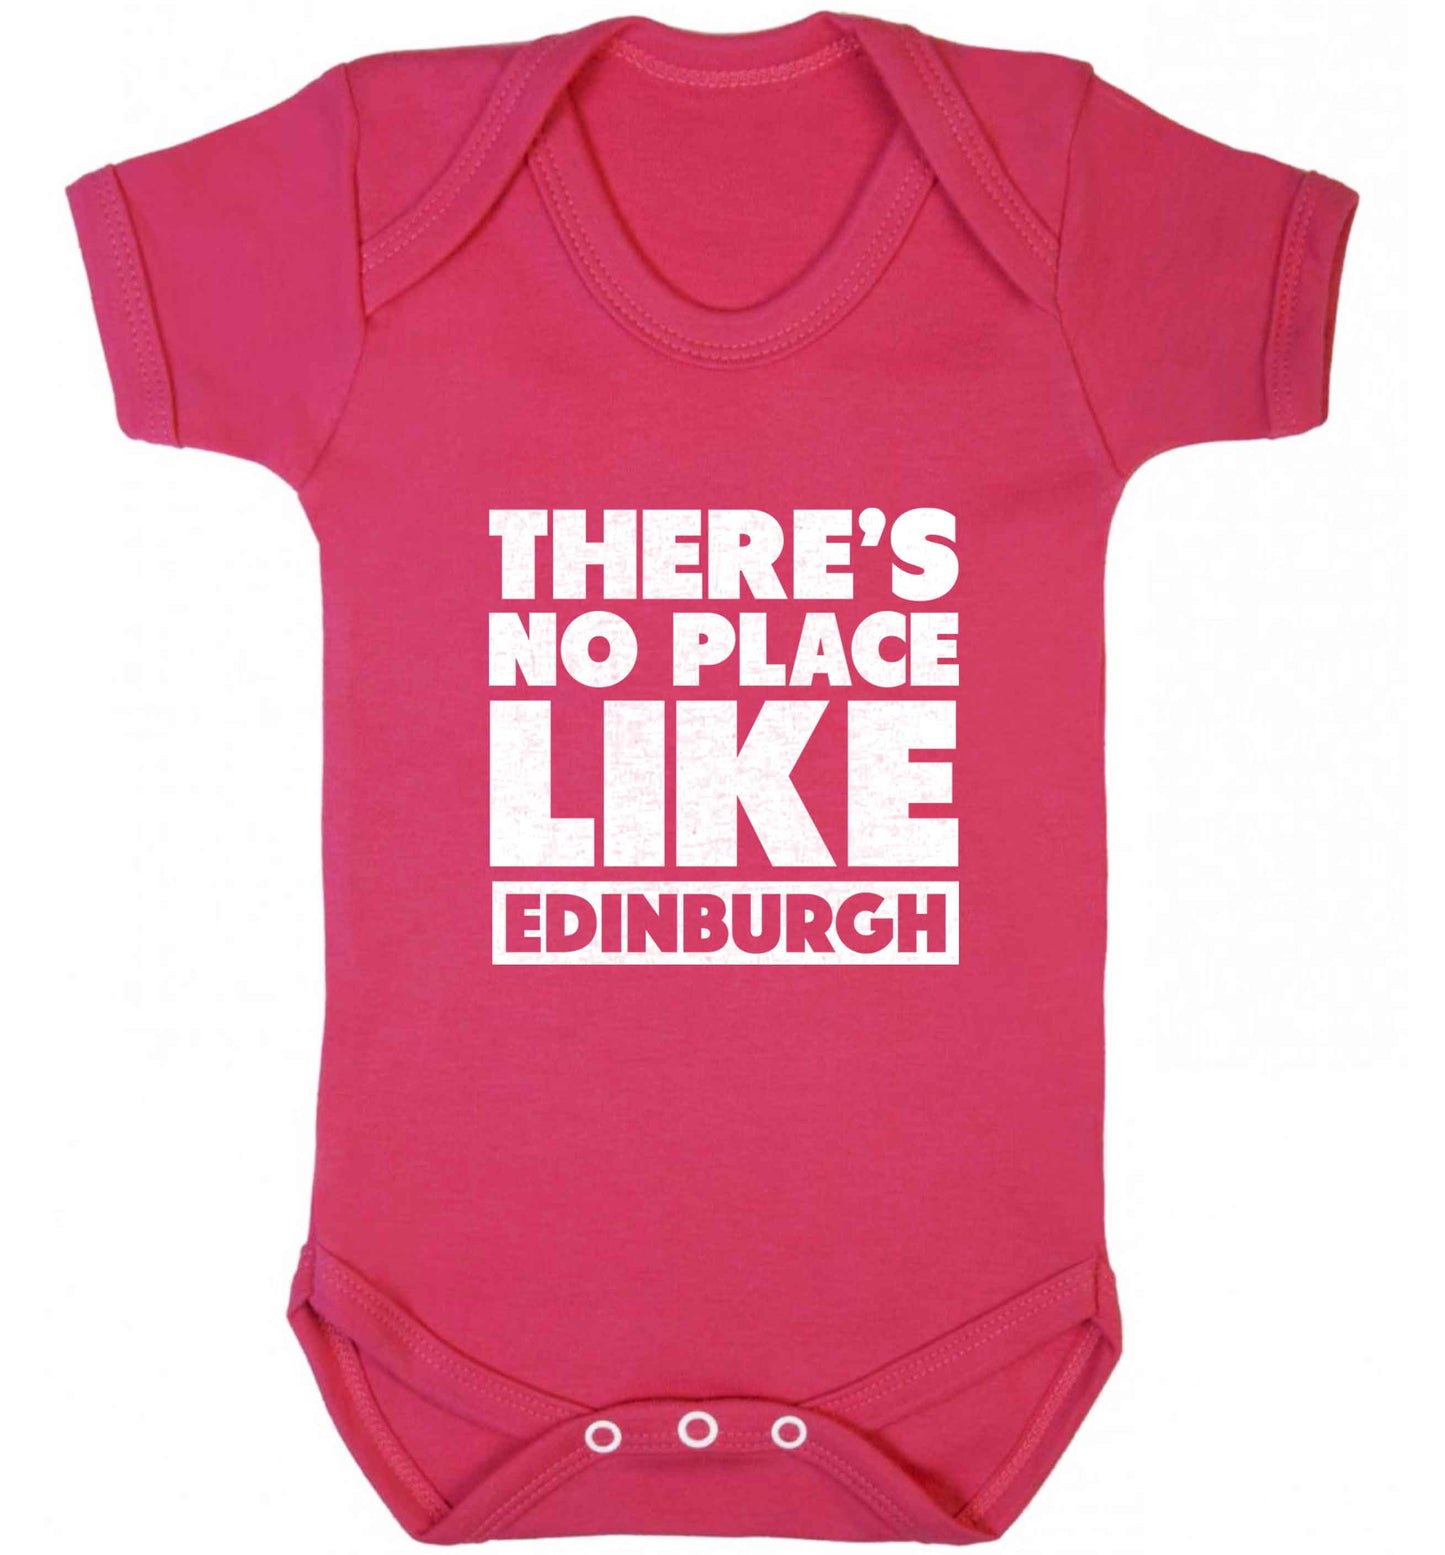 There's no place like Edinburgh baby vest dark pink 18-24 months